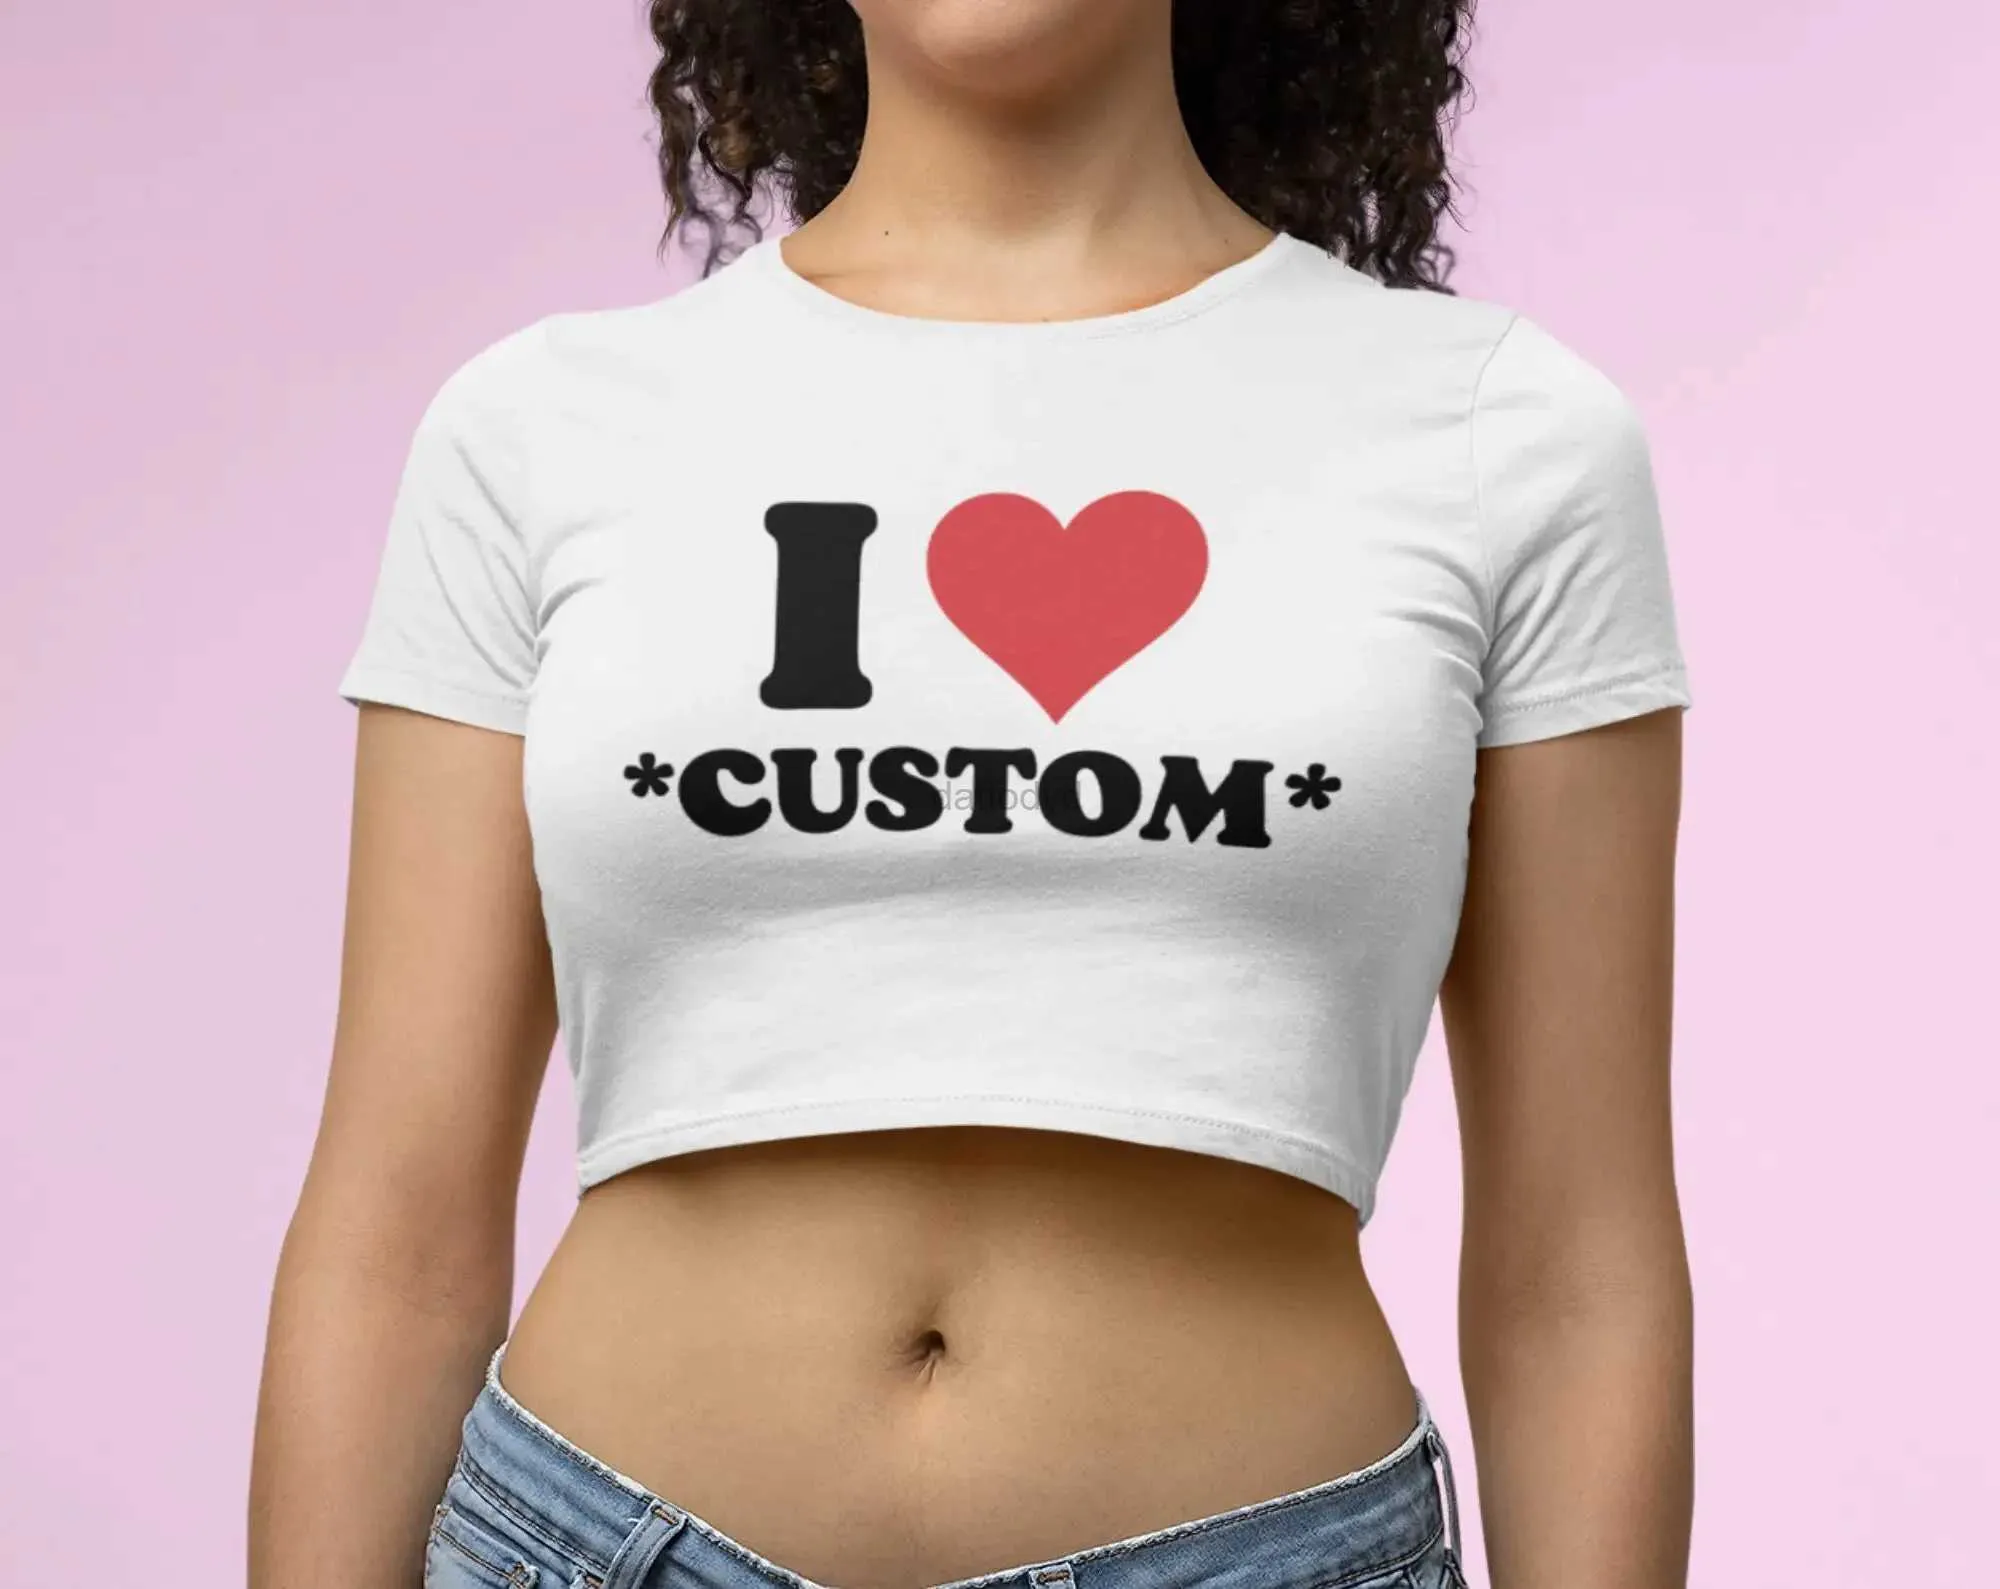 Women's T-Shirt I like custom cut tops for women with relaxed waist photos. Here are DIY personalized photos of myself. Women cut tops with O-necks 240322